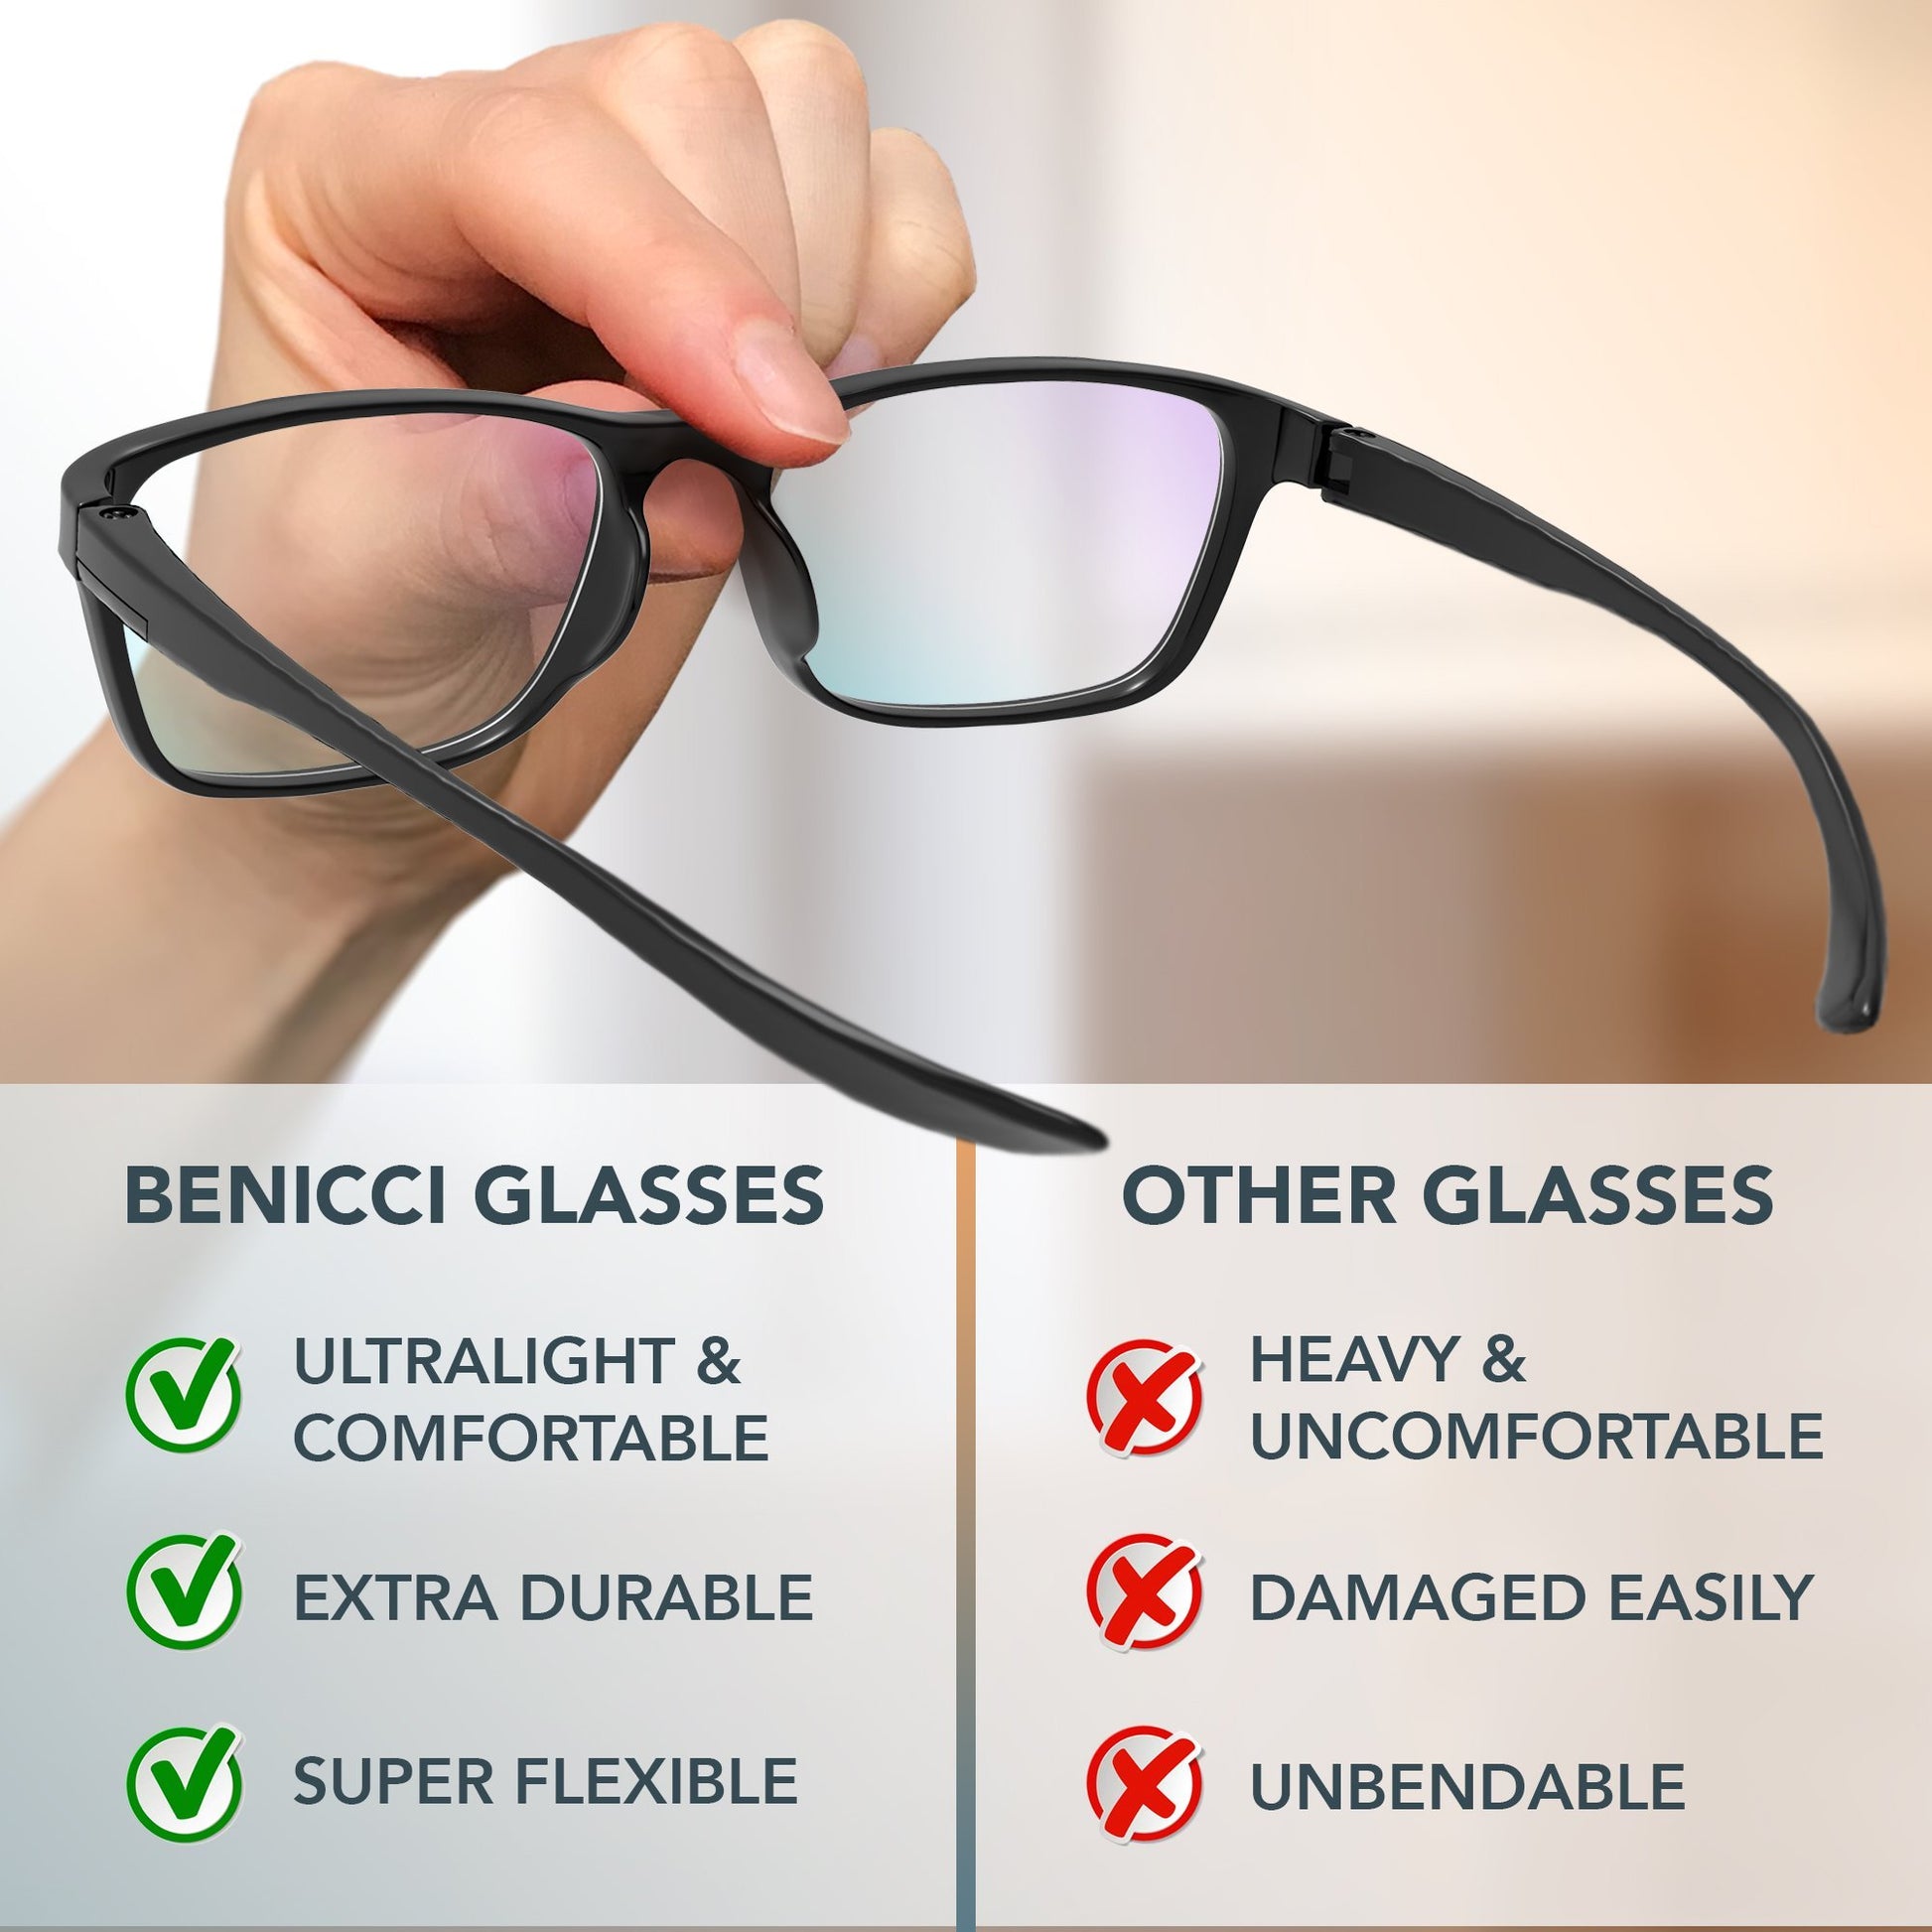 Benicci Stylish Blue Light Blocking Glasses for Women or Men - Ease Computer and Digital Eye Strain, Dry Eyes, Headaches and Blurry Vision - Instantly